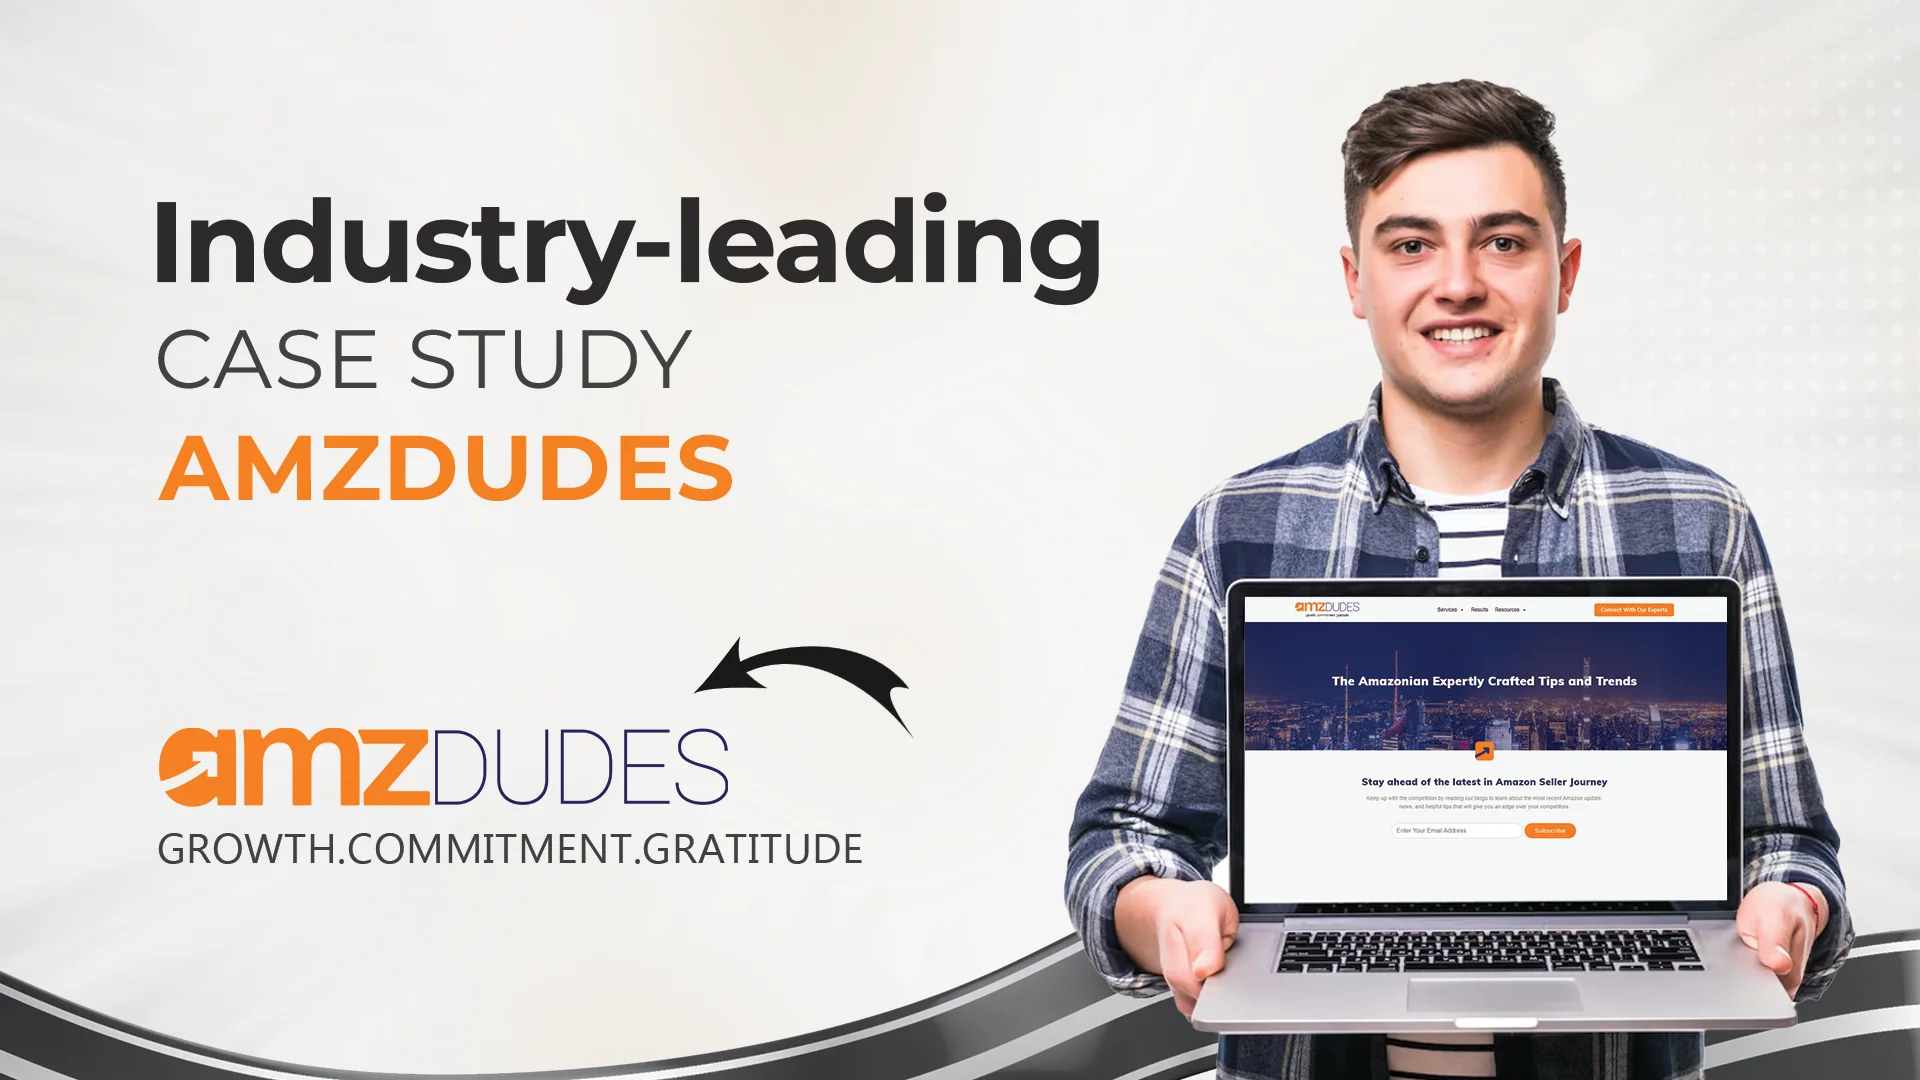 How AMZDUDES Increase Amazon Sales by 144% with Strategic PPC Management